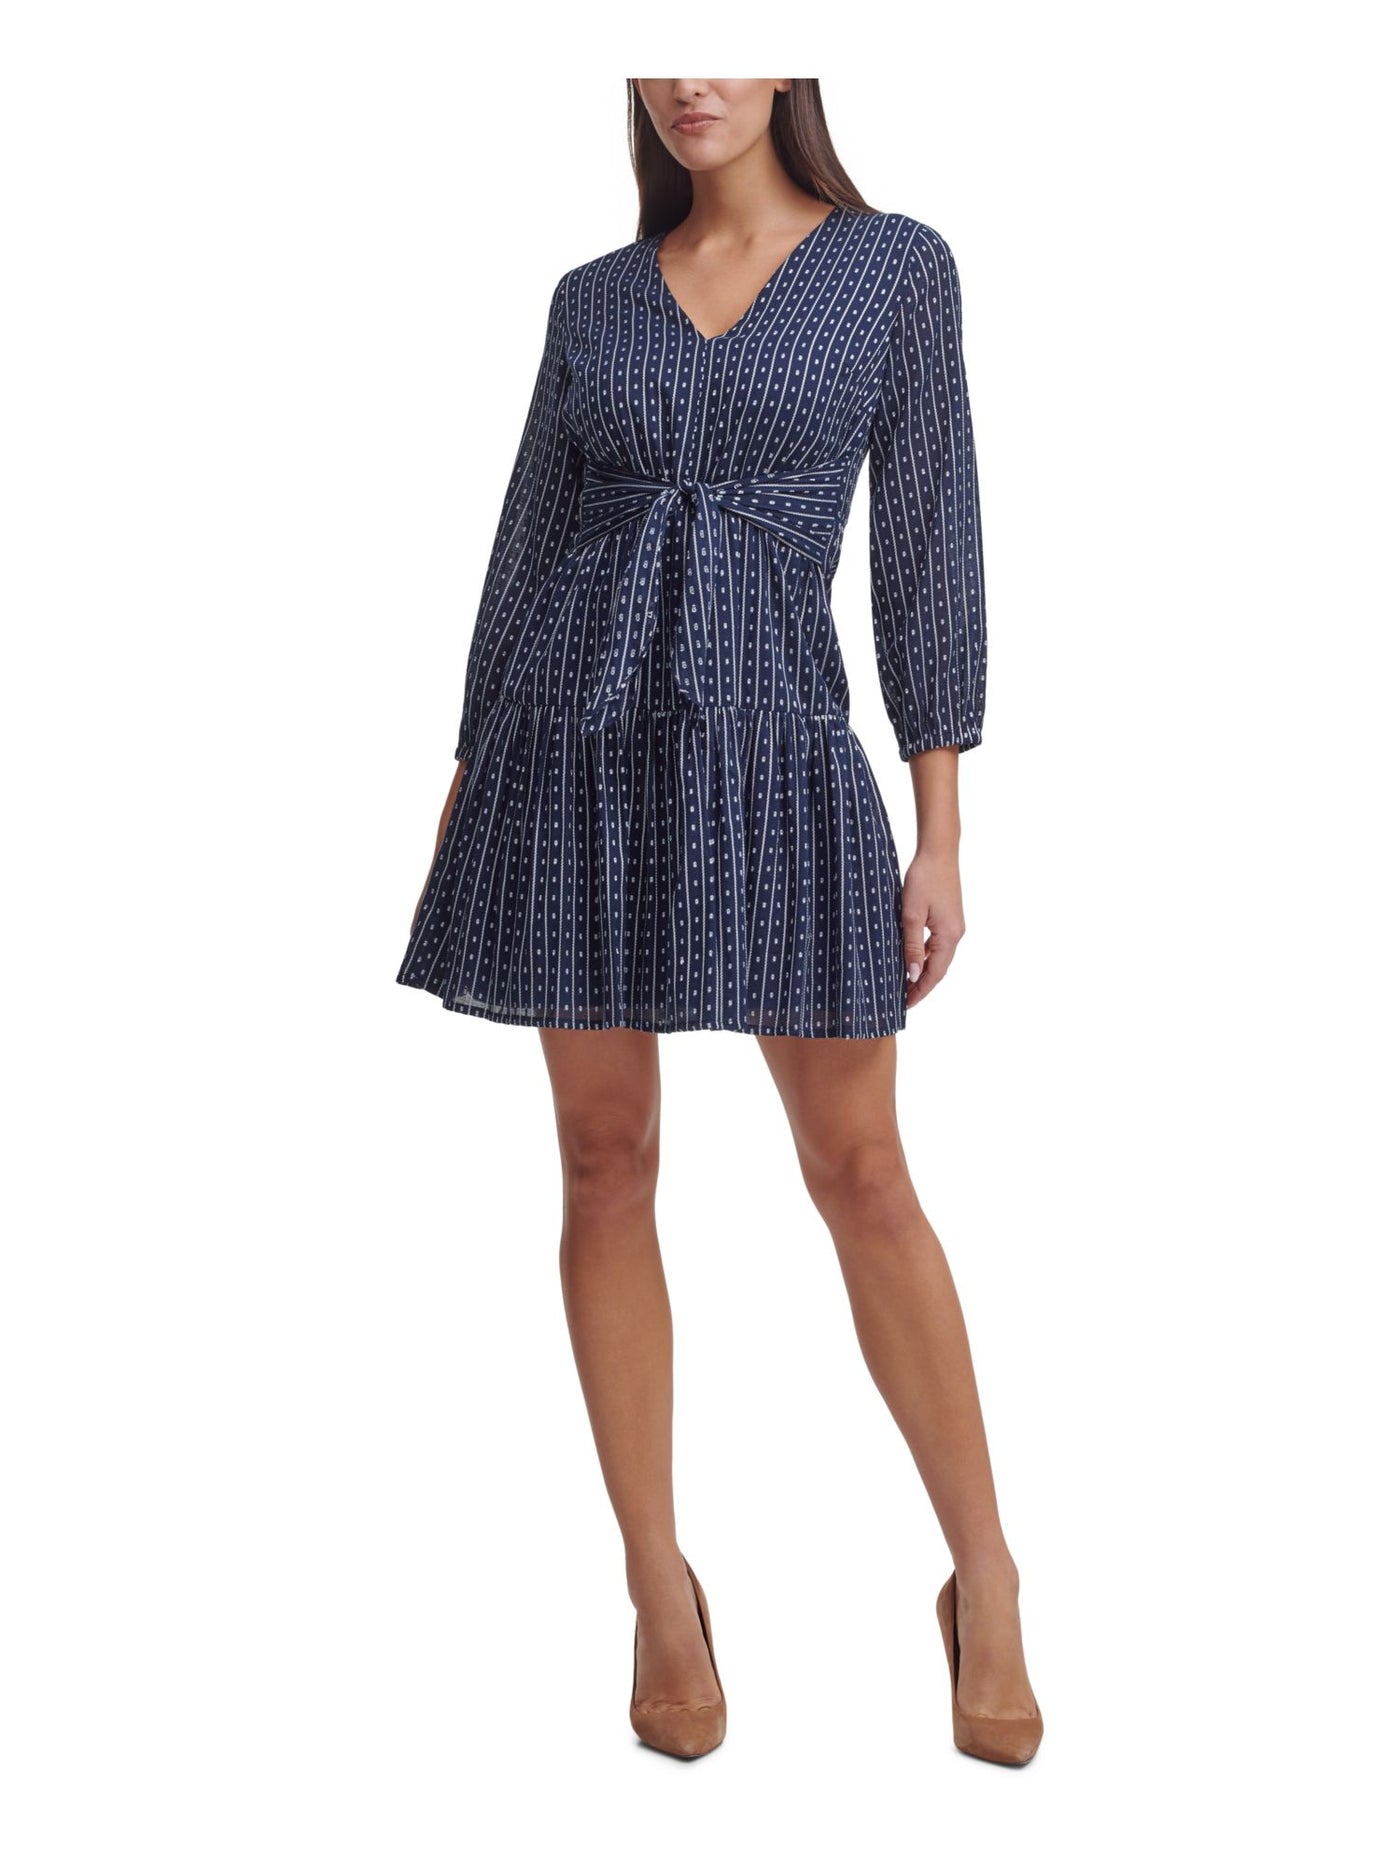 TOMMY HILFIGER Womens Navy Zippered Fitted Sash Tie Unlined Printed 3/4 Sleeve V Neck Mini Party Fit + Flare Dress Petites 4P